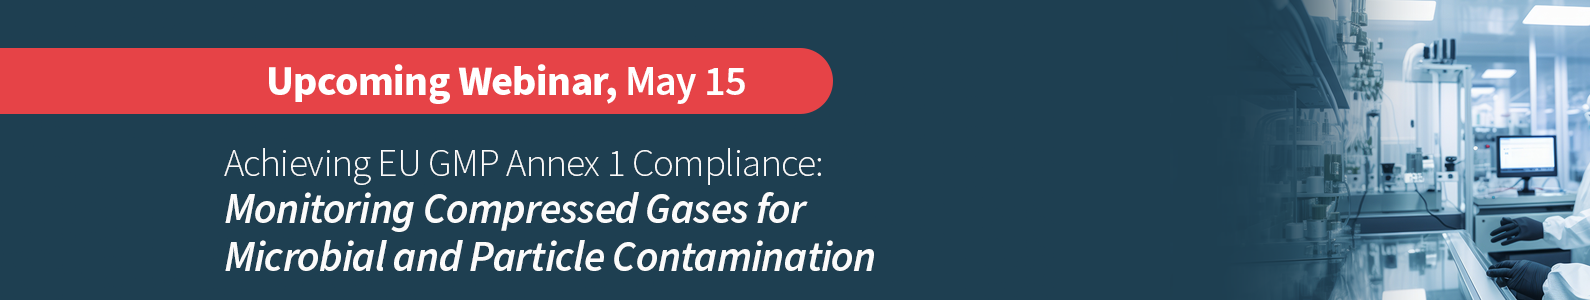 Achievieng EU GMP Annex 1 Compliance: Monitoring Compressed Gases for Microbial and Particle Contamination webinar on May 15